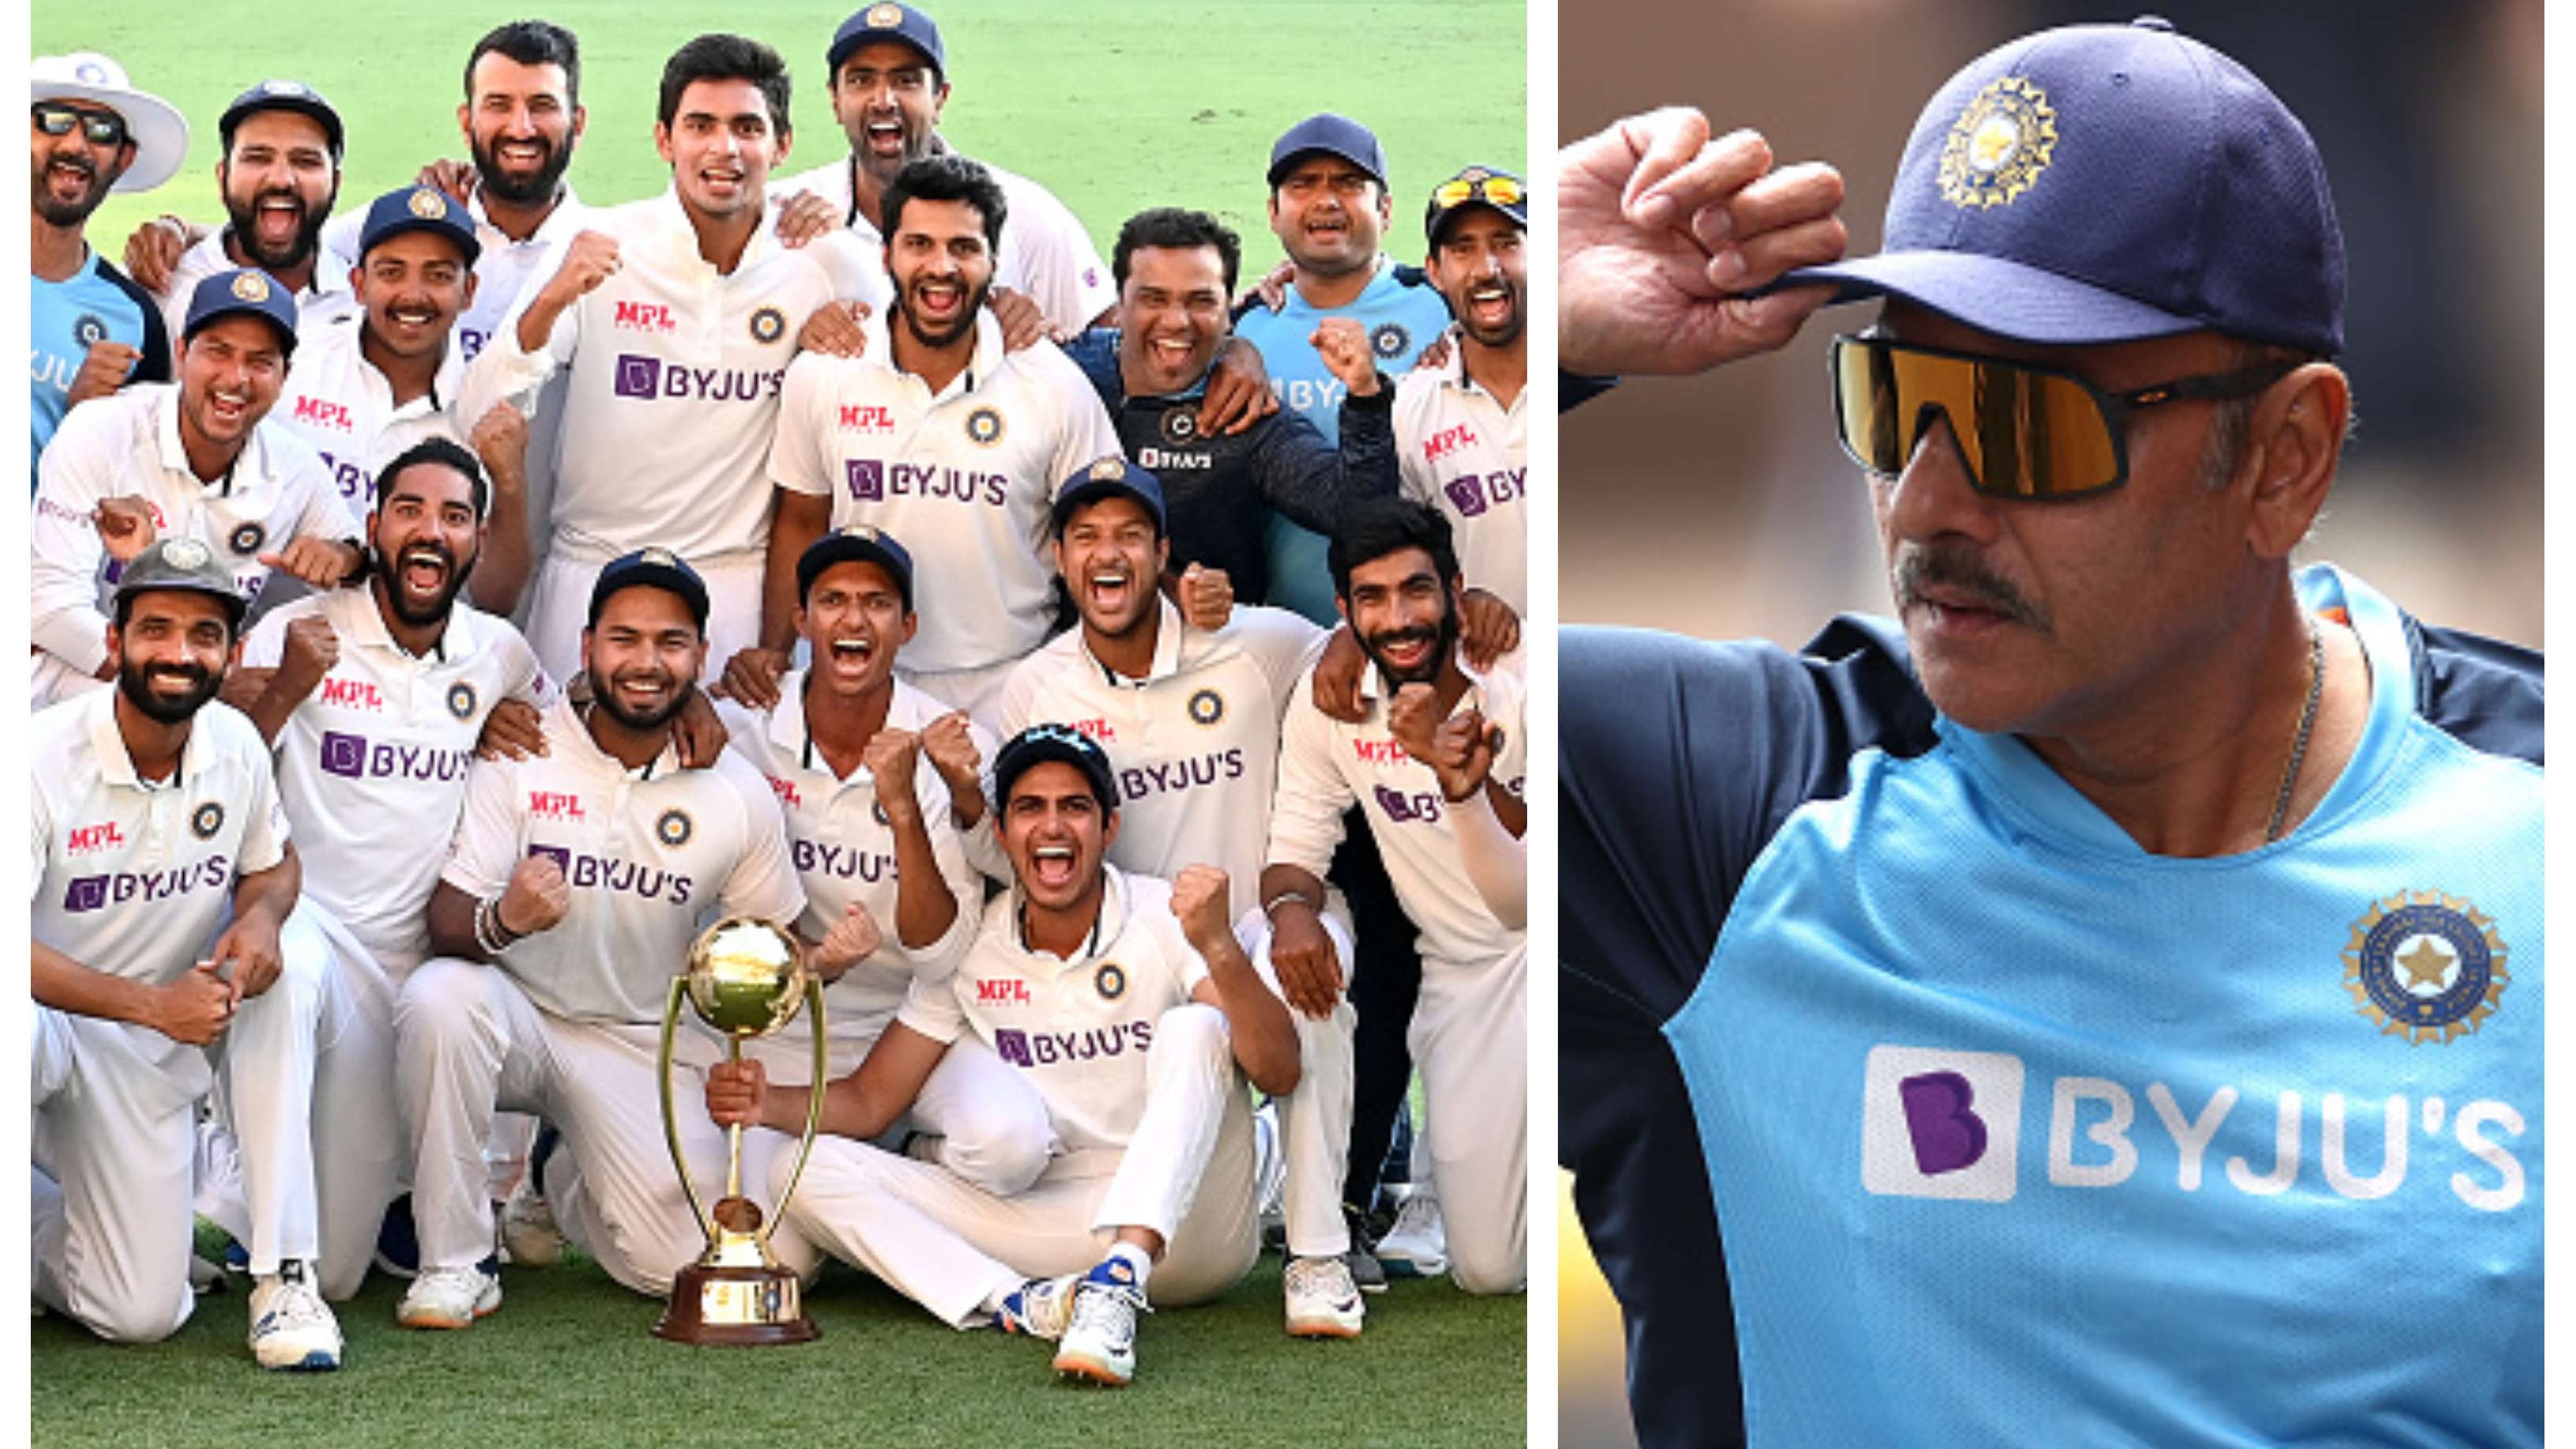 AUS v IND 2020-21: ‘After 36 all out, this is unreal’, Ravi Shastri elated after Test series win over Australia